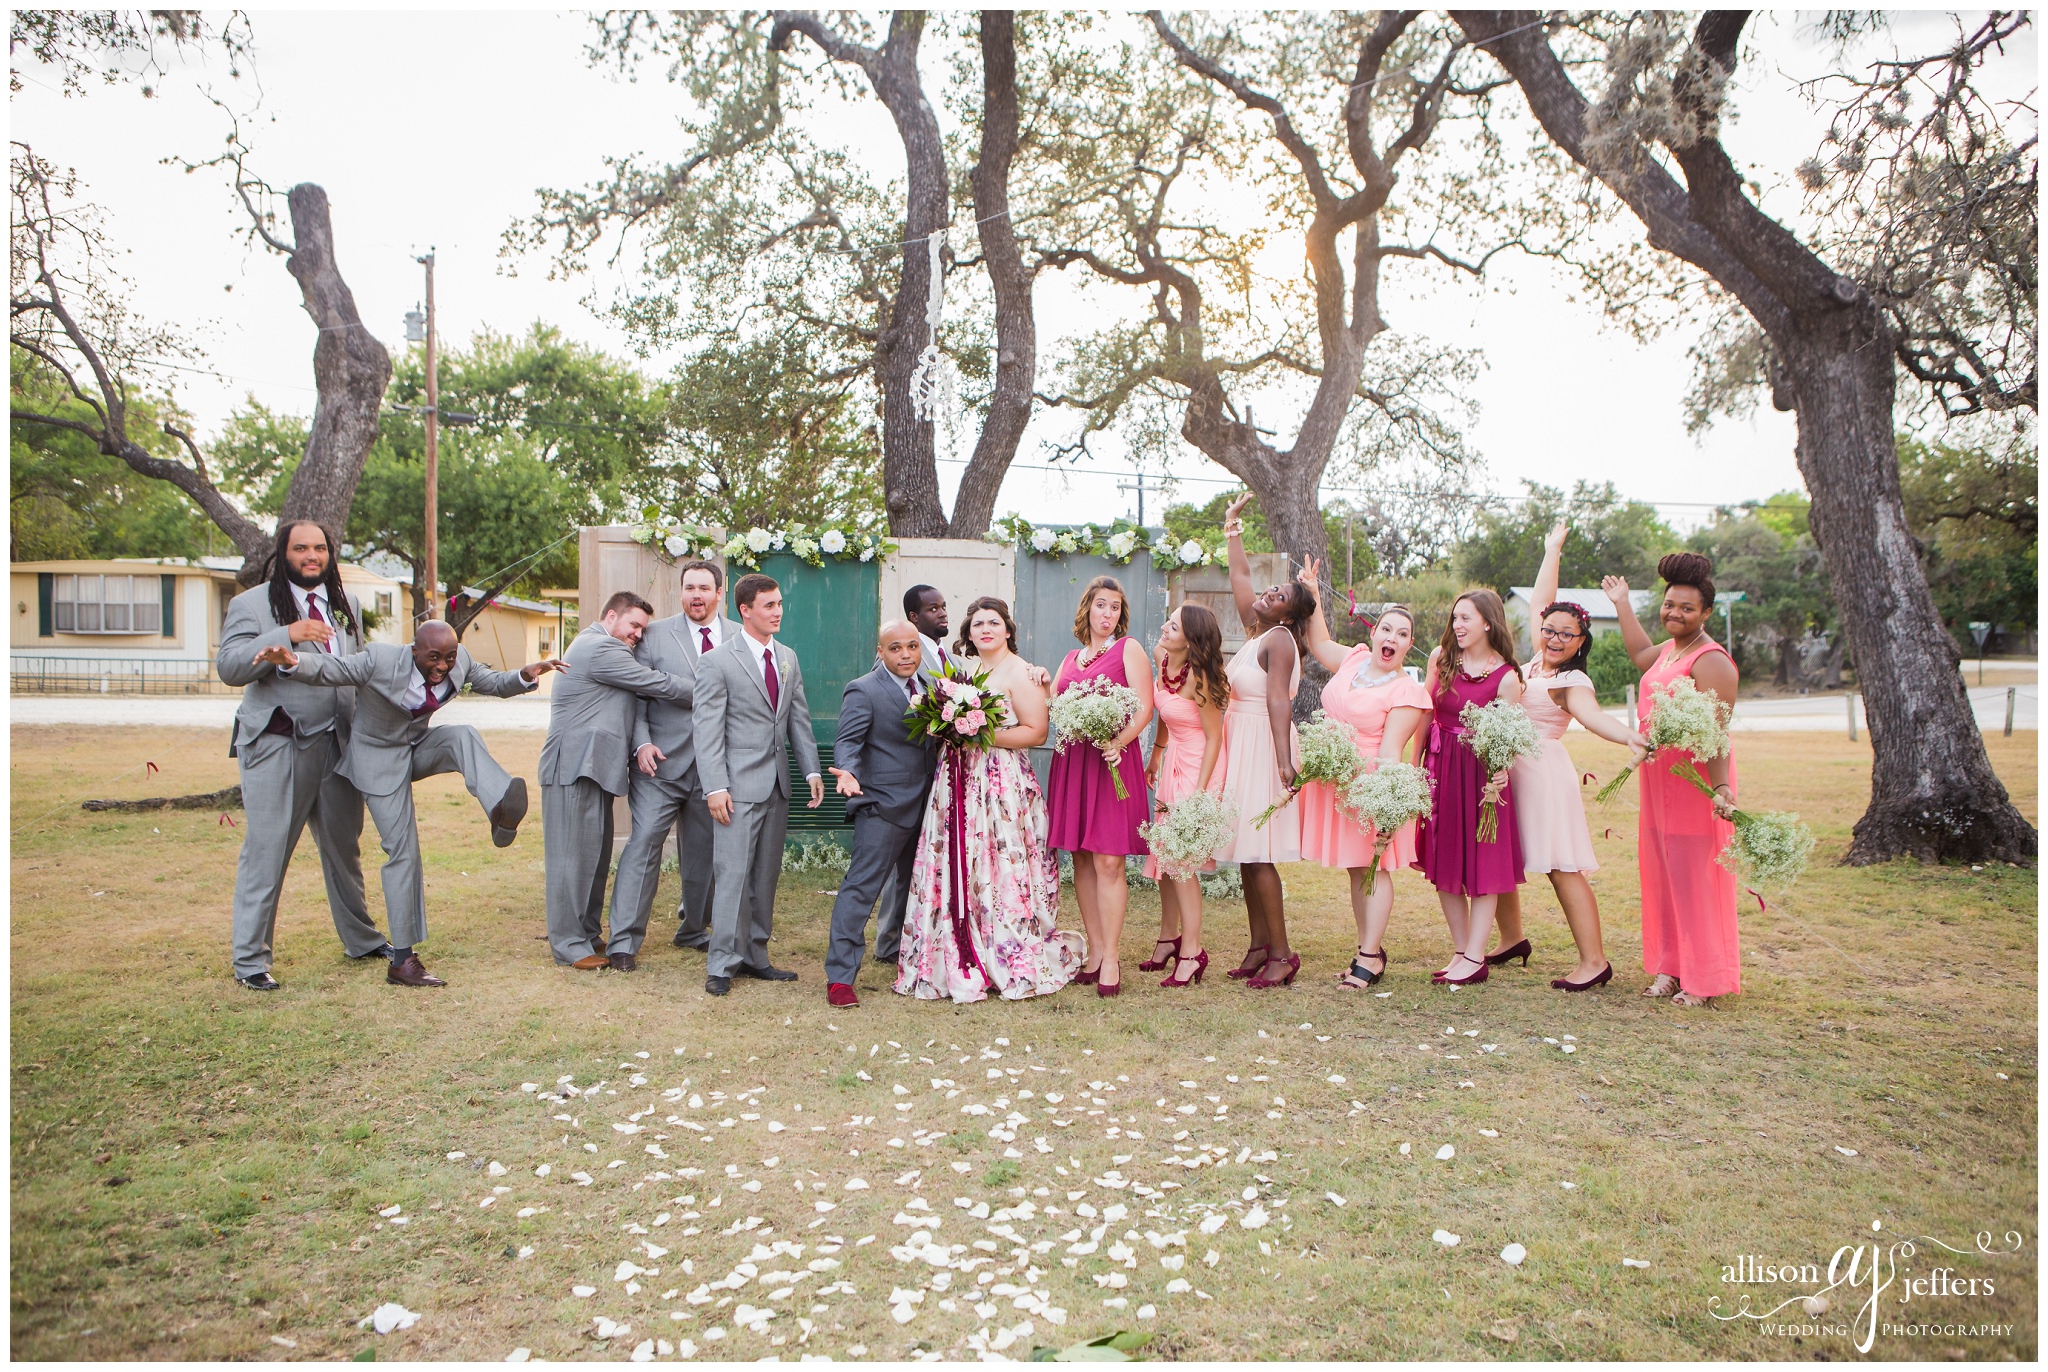 Kerrville Wedding Photographer Unique fun wedding with floral dress 0057